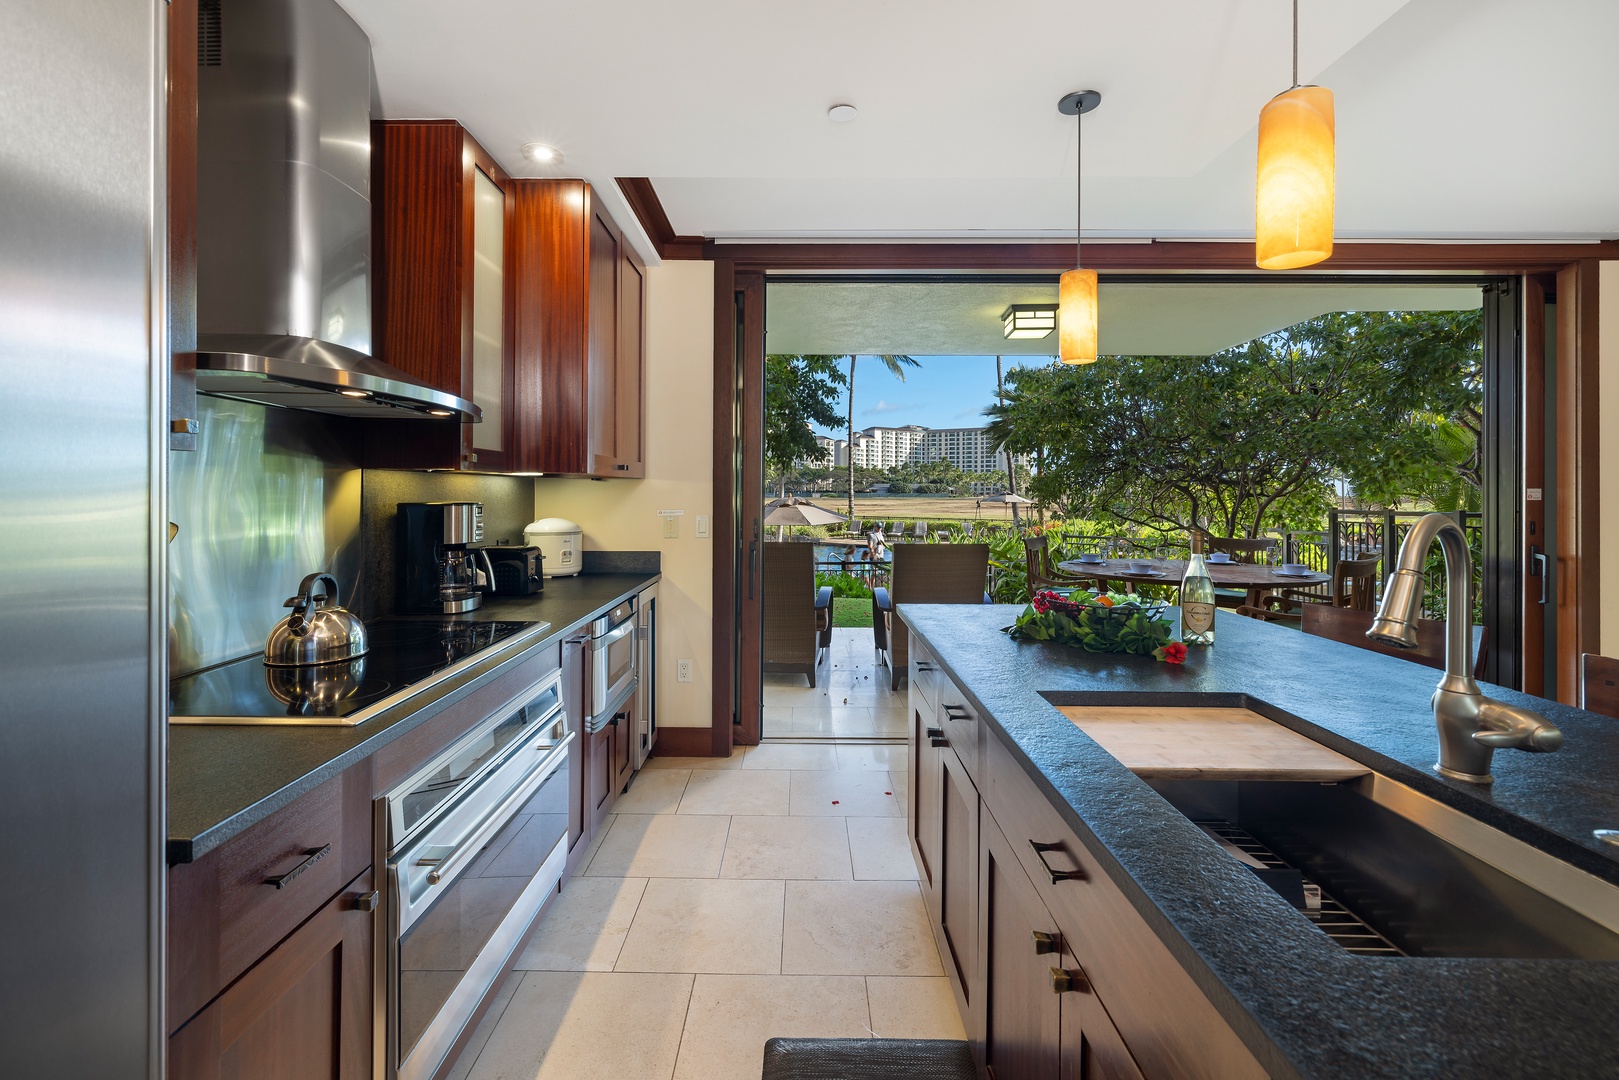 Kapolei Vacation Rentals, Ko Olina Beach Villas B107 - The kitchen features stainless steel appliances and lovely views.